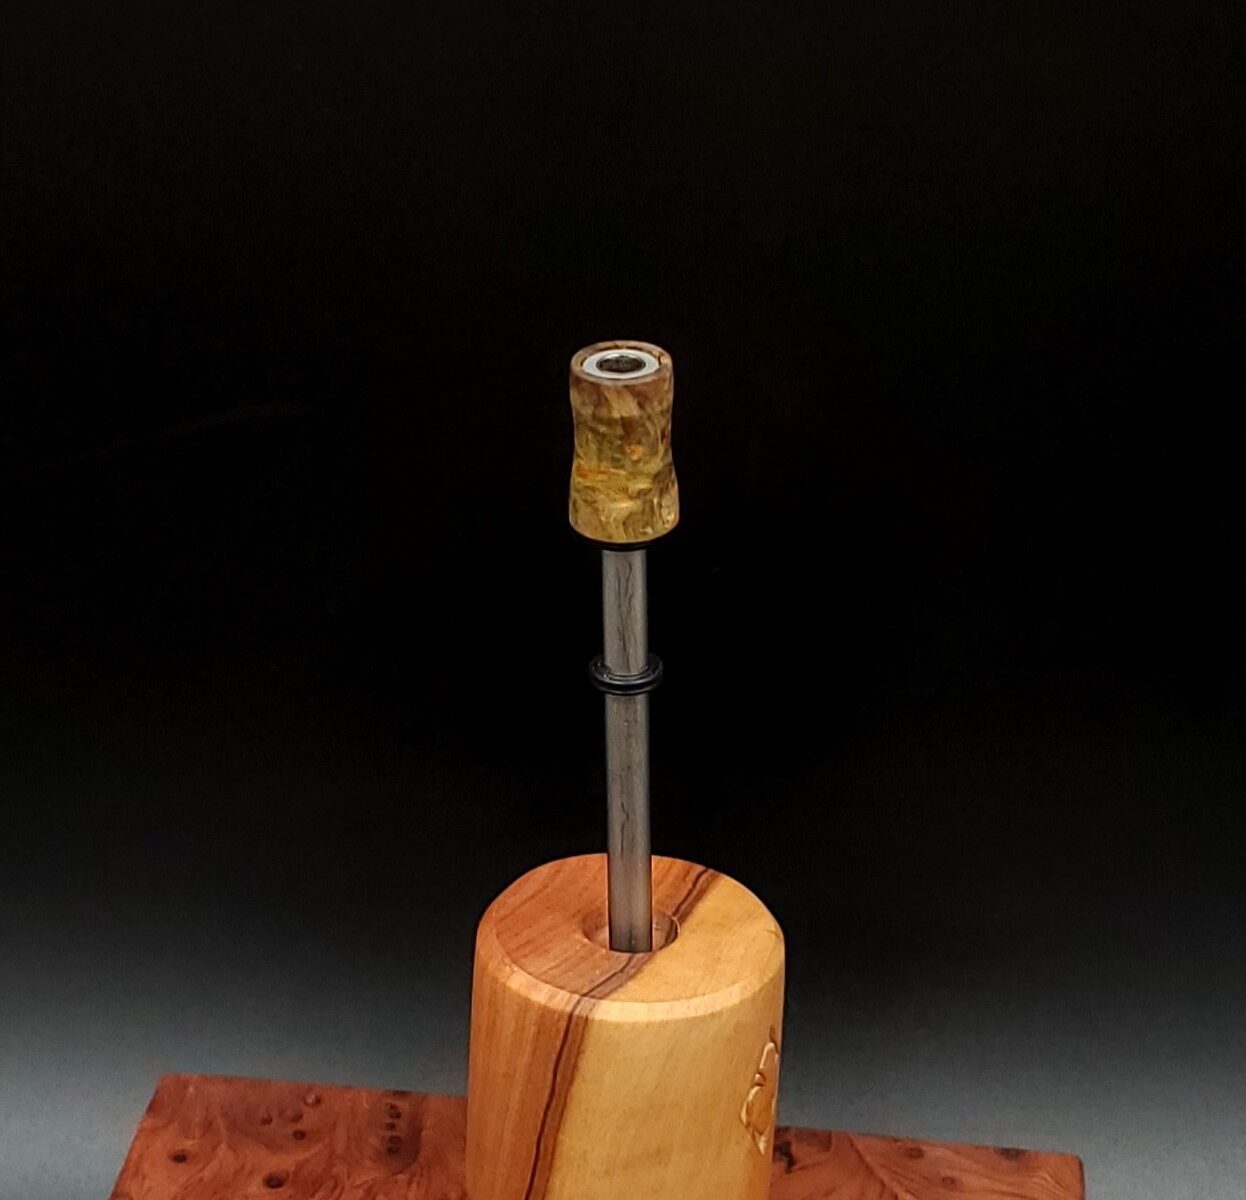 This image portrays Dynavap Spinning Mouthpiece-Cosmic Burl Series by Dovetail Woodwork.